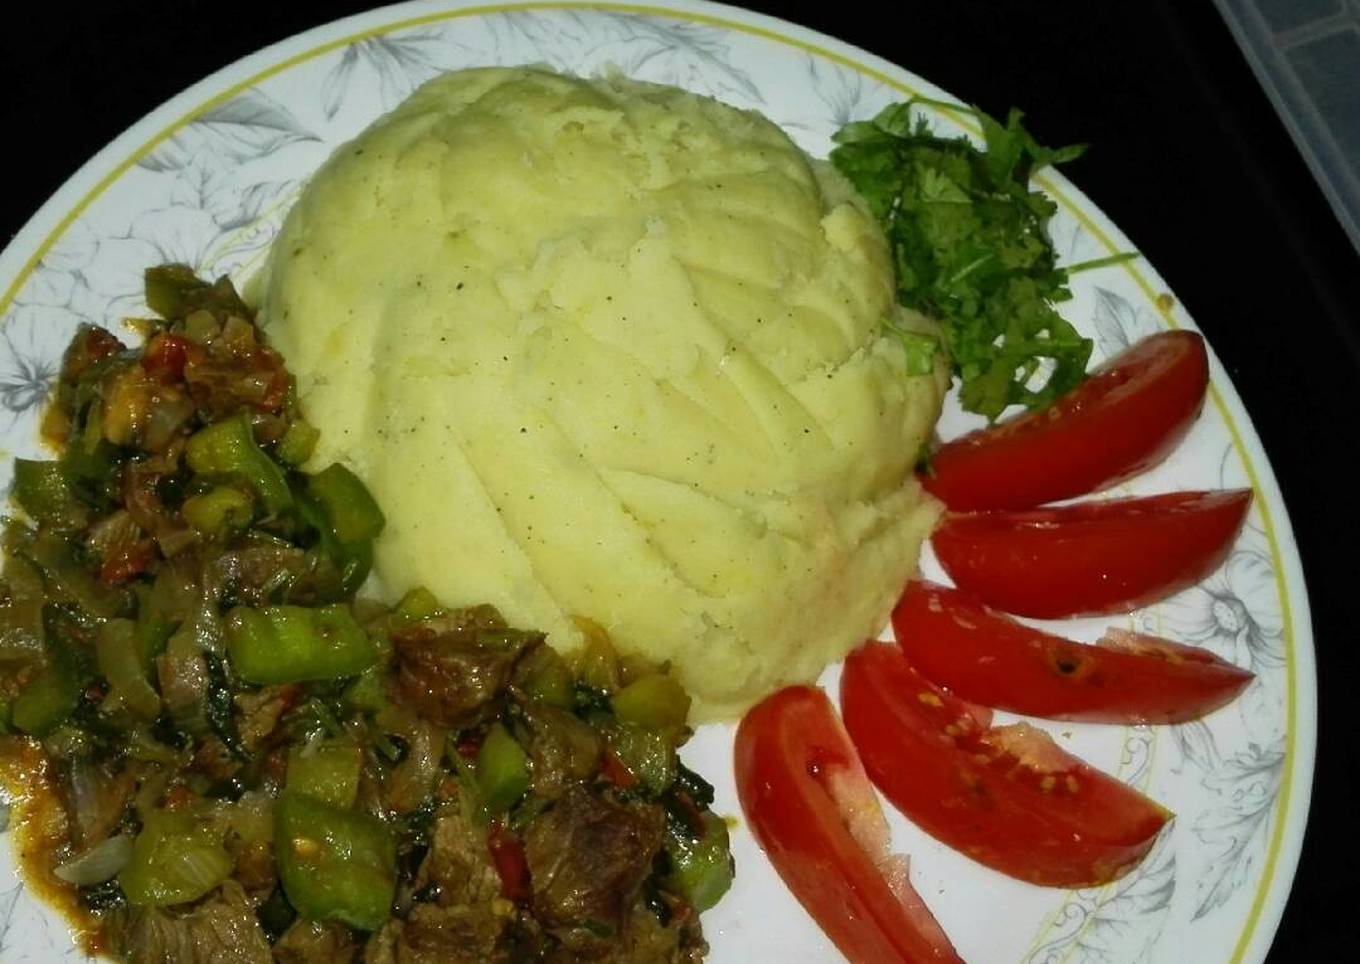 mushed potatoes and beef